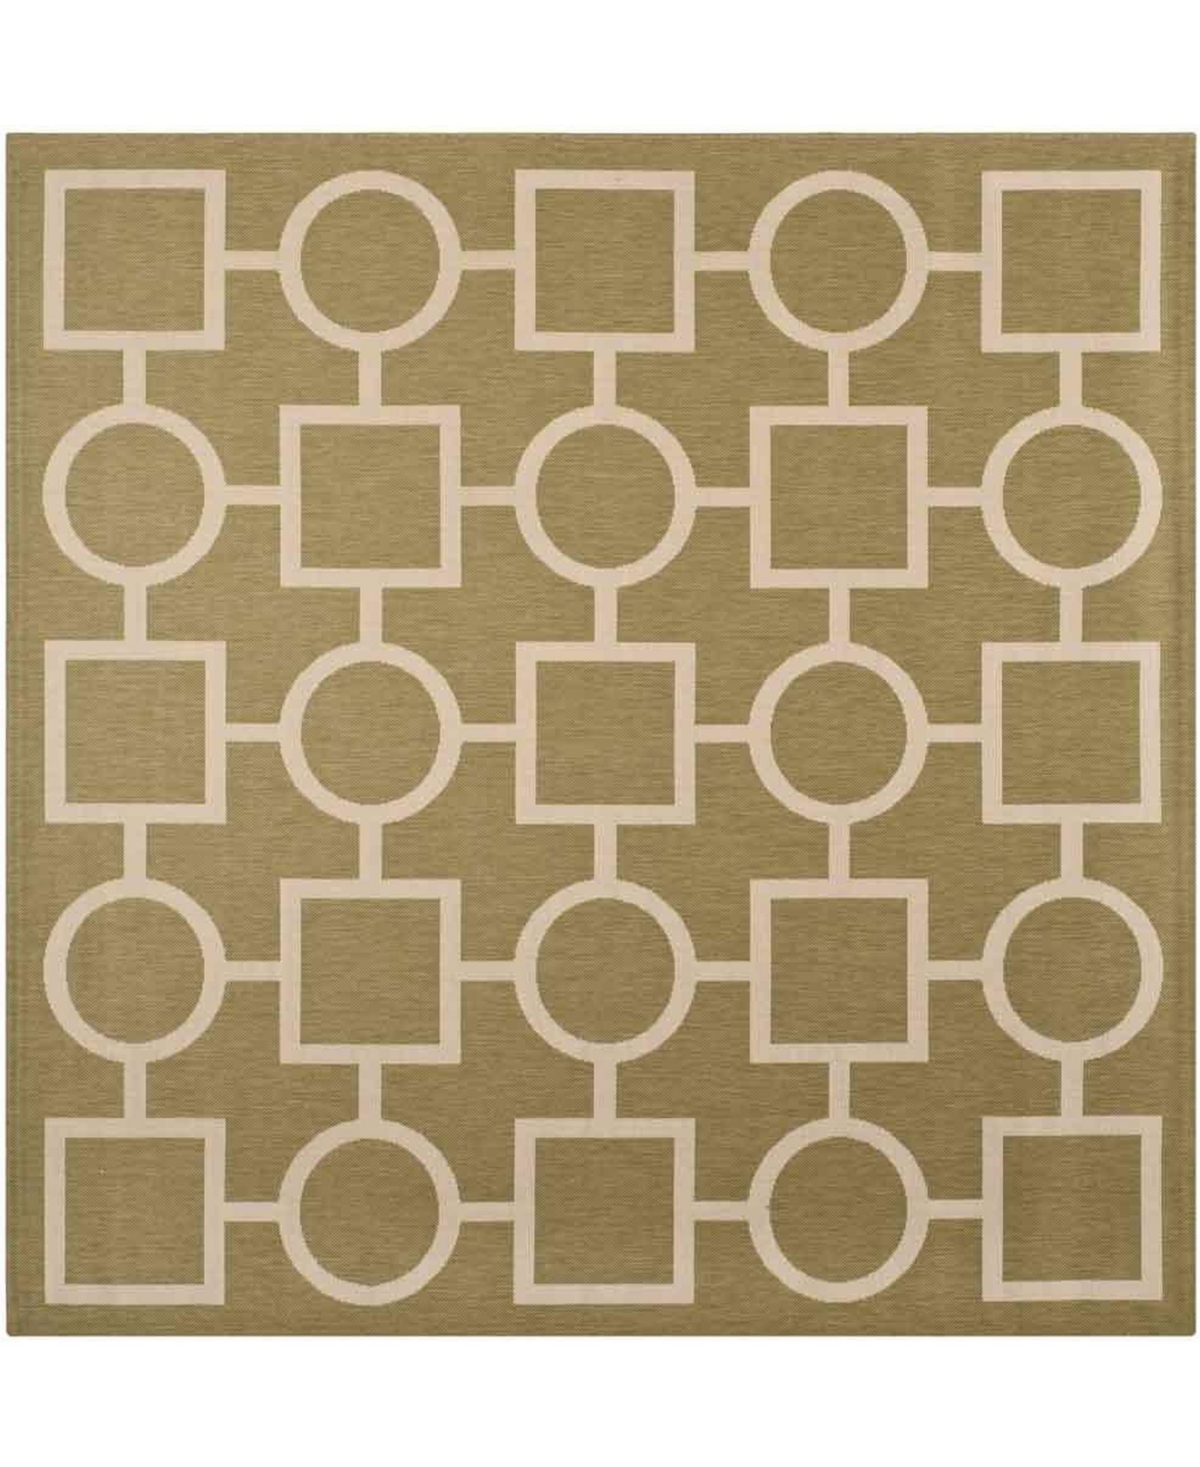 Safavieh Courtyard Cy6925 Green And Beige 7'10" X 7'10" Sisal Weave Square Outdoor Area Rug